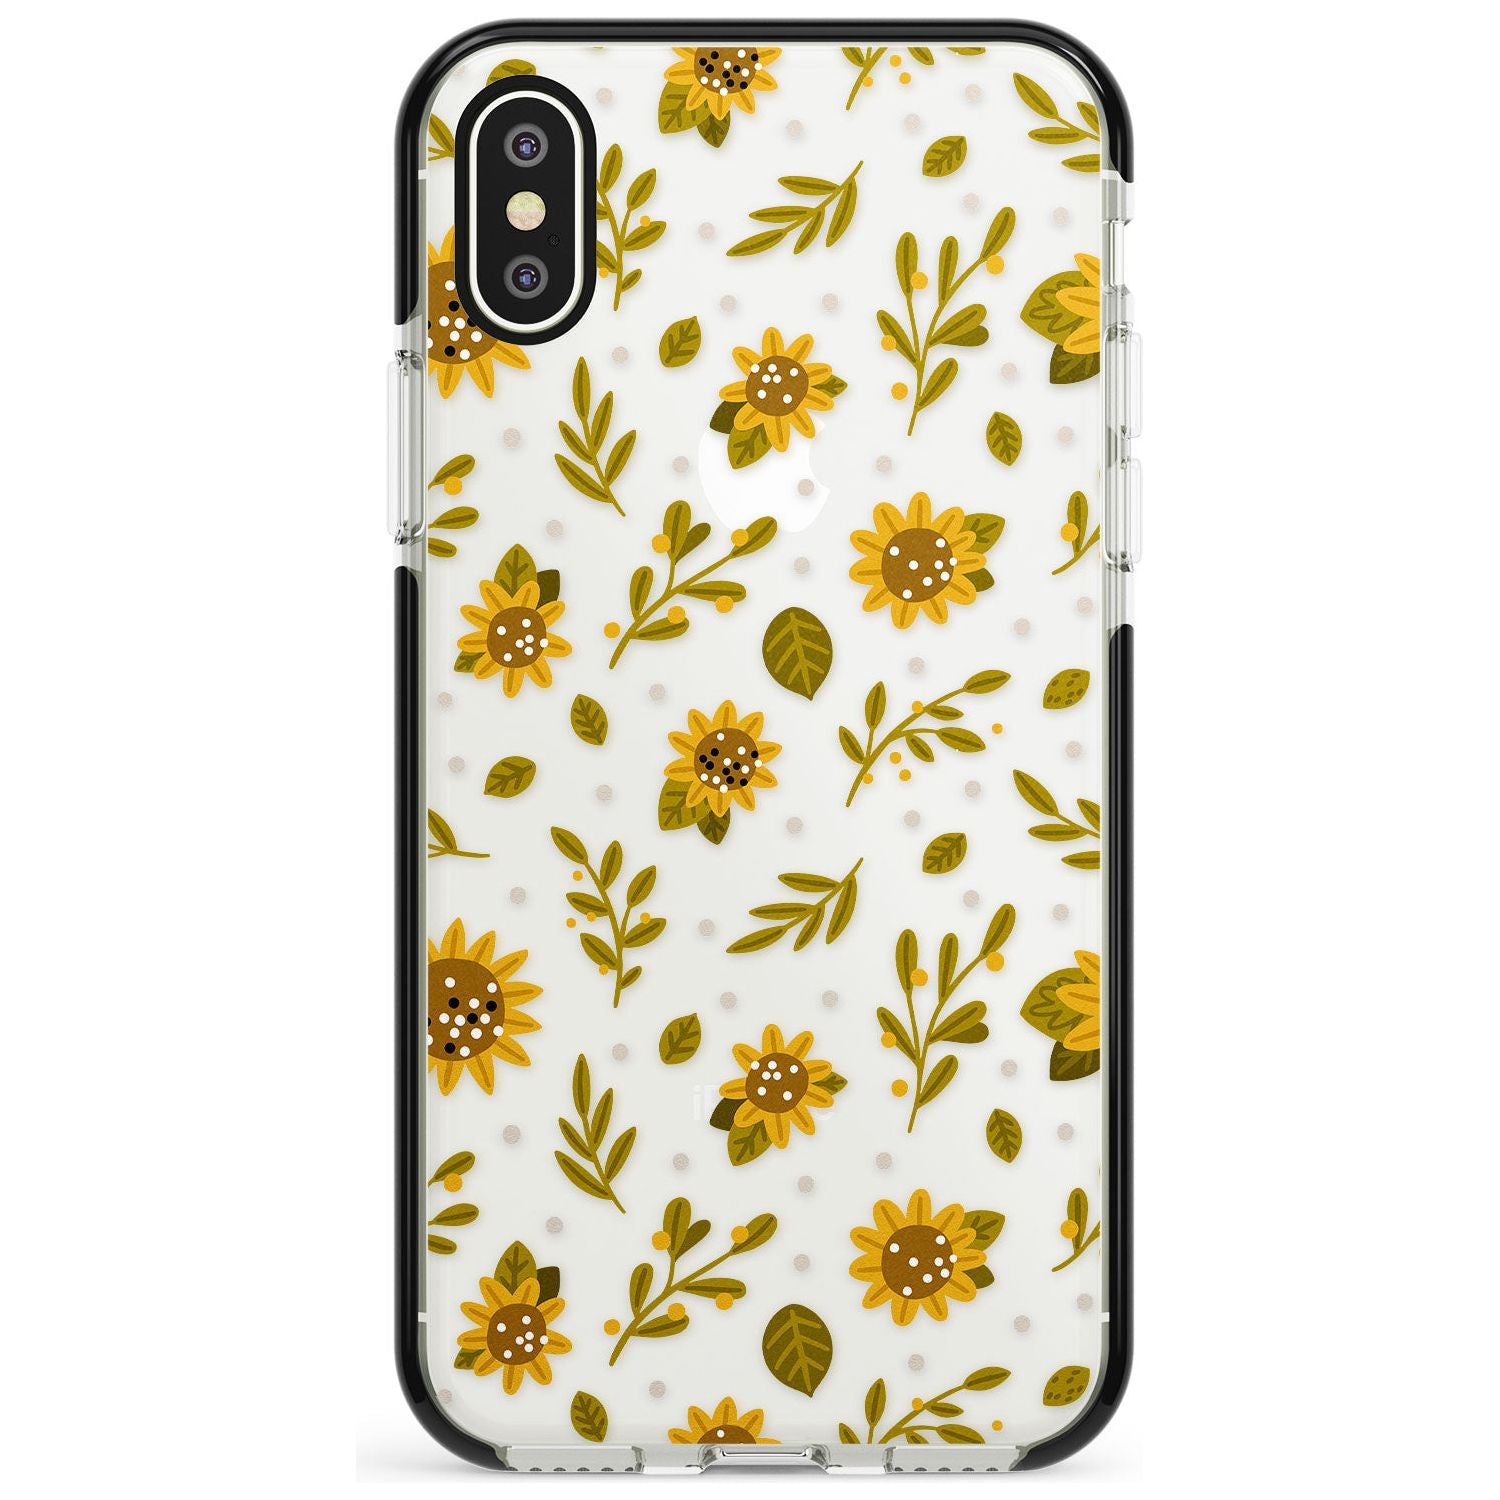 Sweet as Honey Patterns: Sunflowers (Clear) Black Impact Phone Case for iPhone X XS Max XR